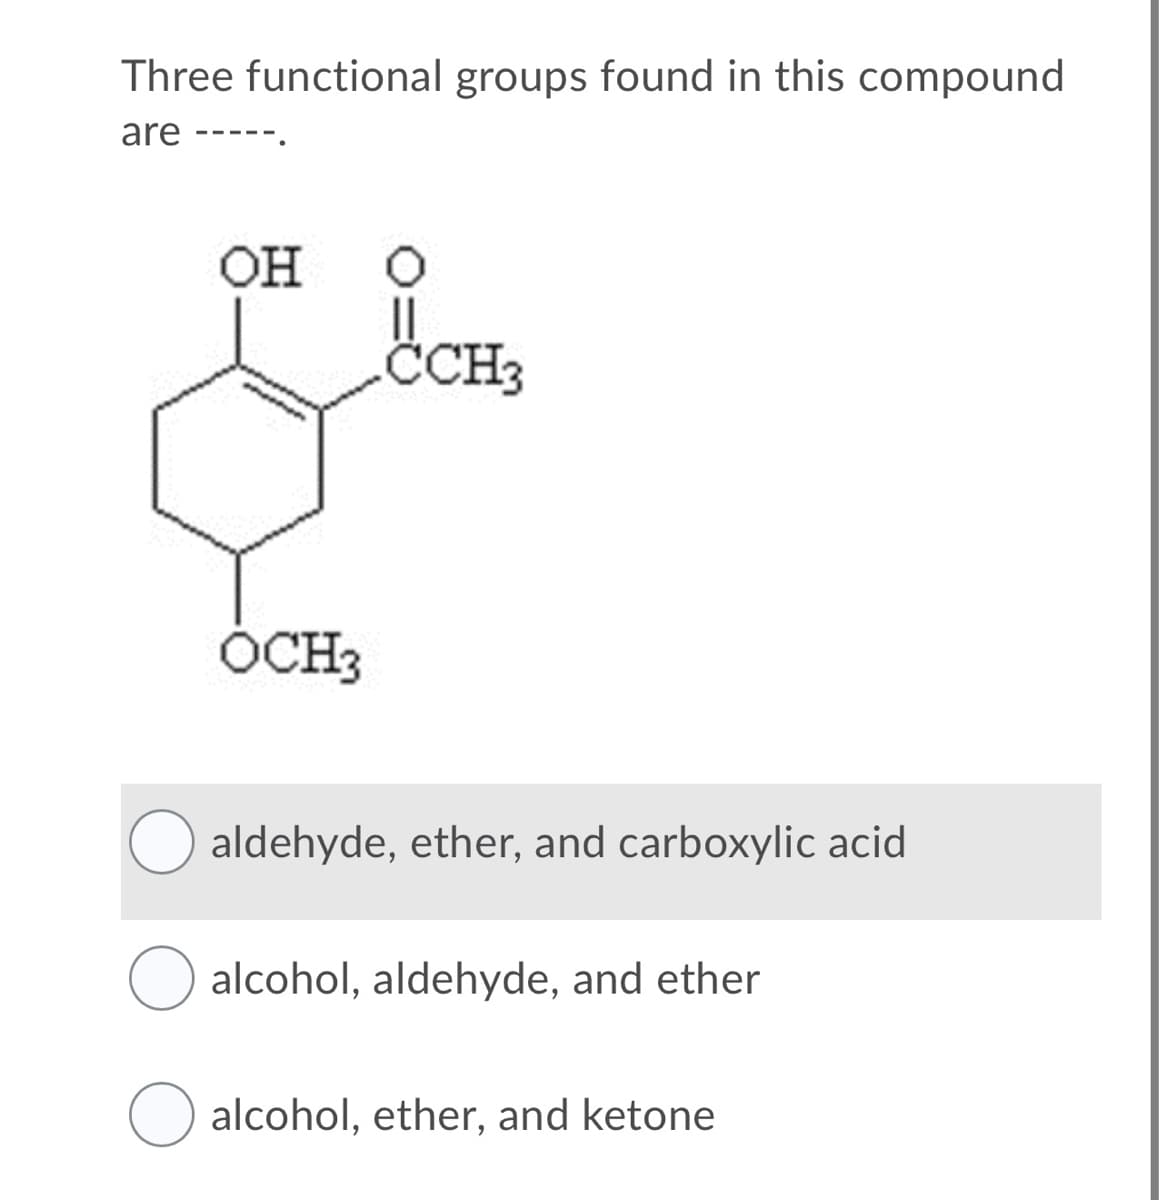 Three functional groups found in this compound
are ---
он
CCH3
ÓCH3
aldehyde, ether, and carboxylic acid
O alcohol, aldehyde, and ether
alcohol, ether, and ketone
